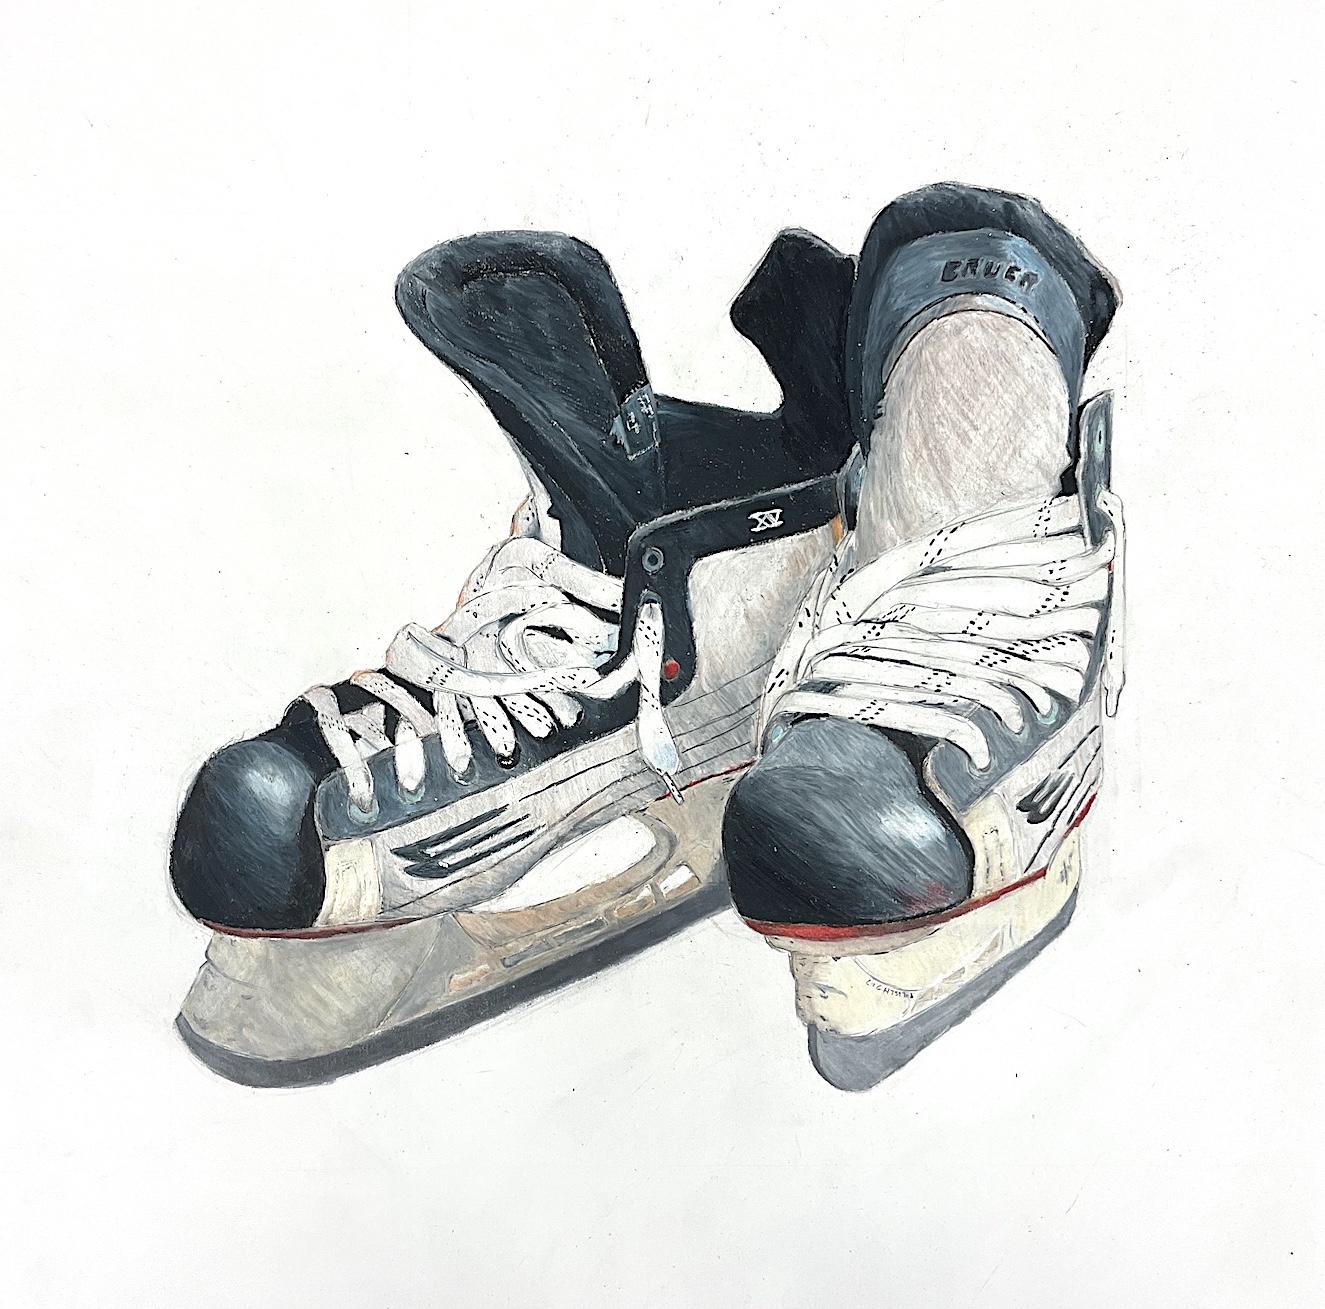 Advanced Art 1, Cranston High School East. Completed “Treasured Objects” Assignment depicting student hockey skates.  